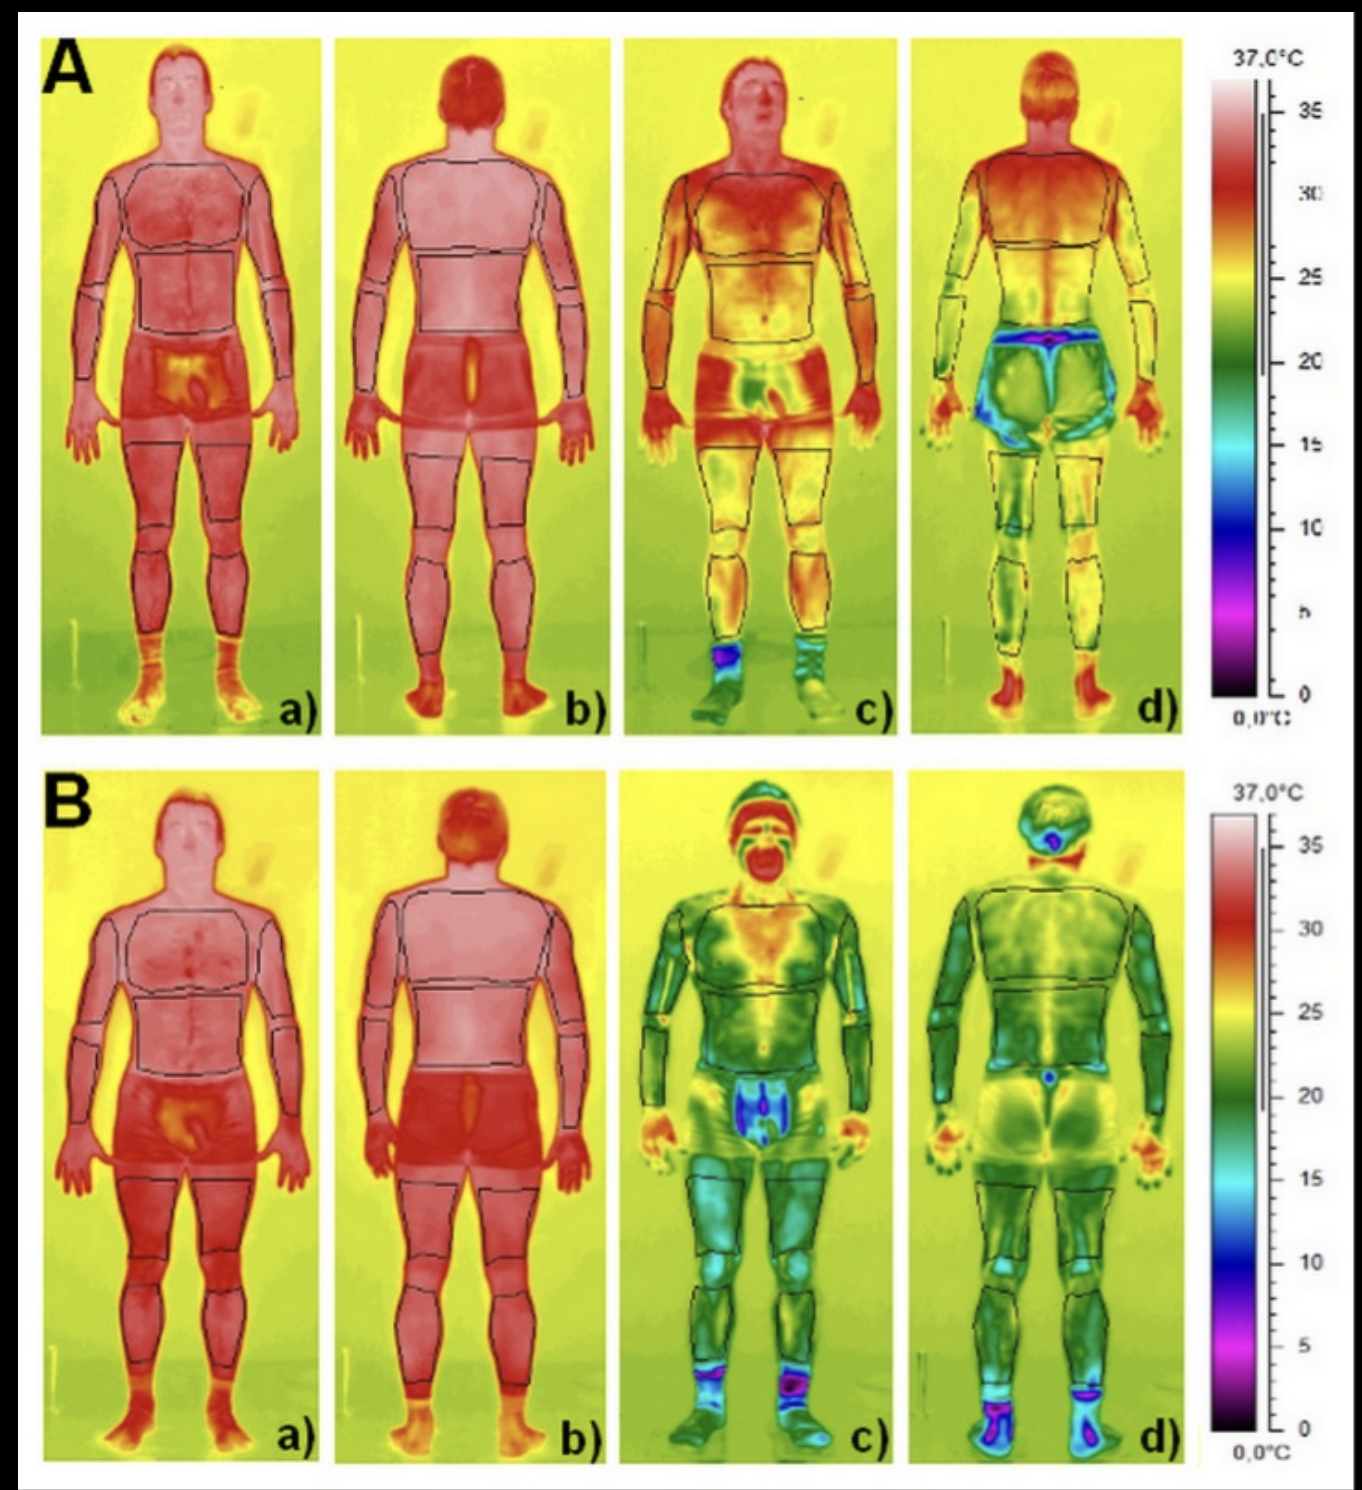 Graphic from pubmed study showing Whole Body Cryotherapy vs Partial Body Cryotherapy differences in skin temperature before and after